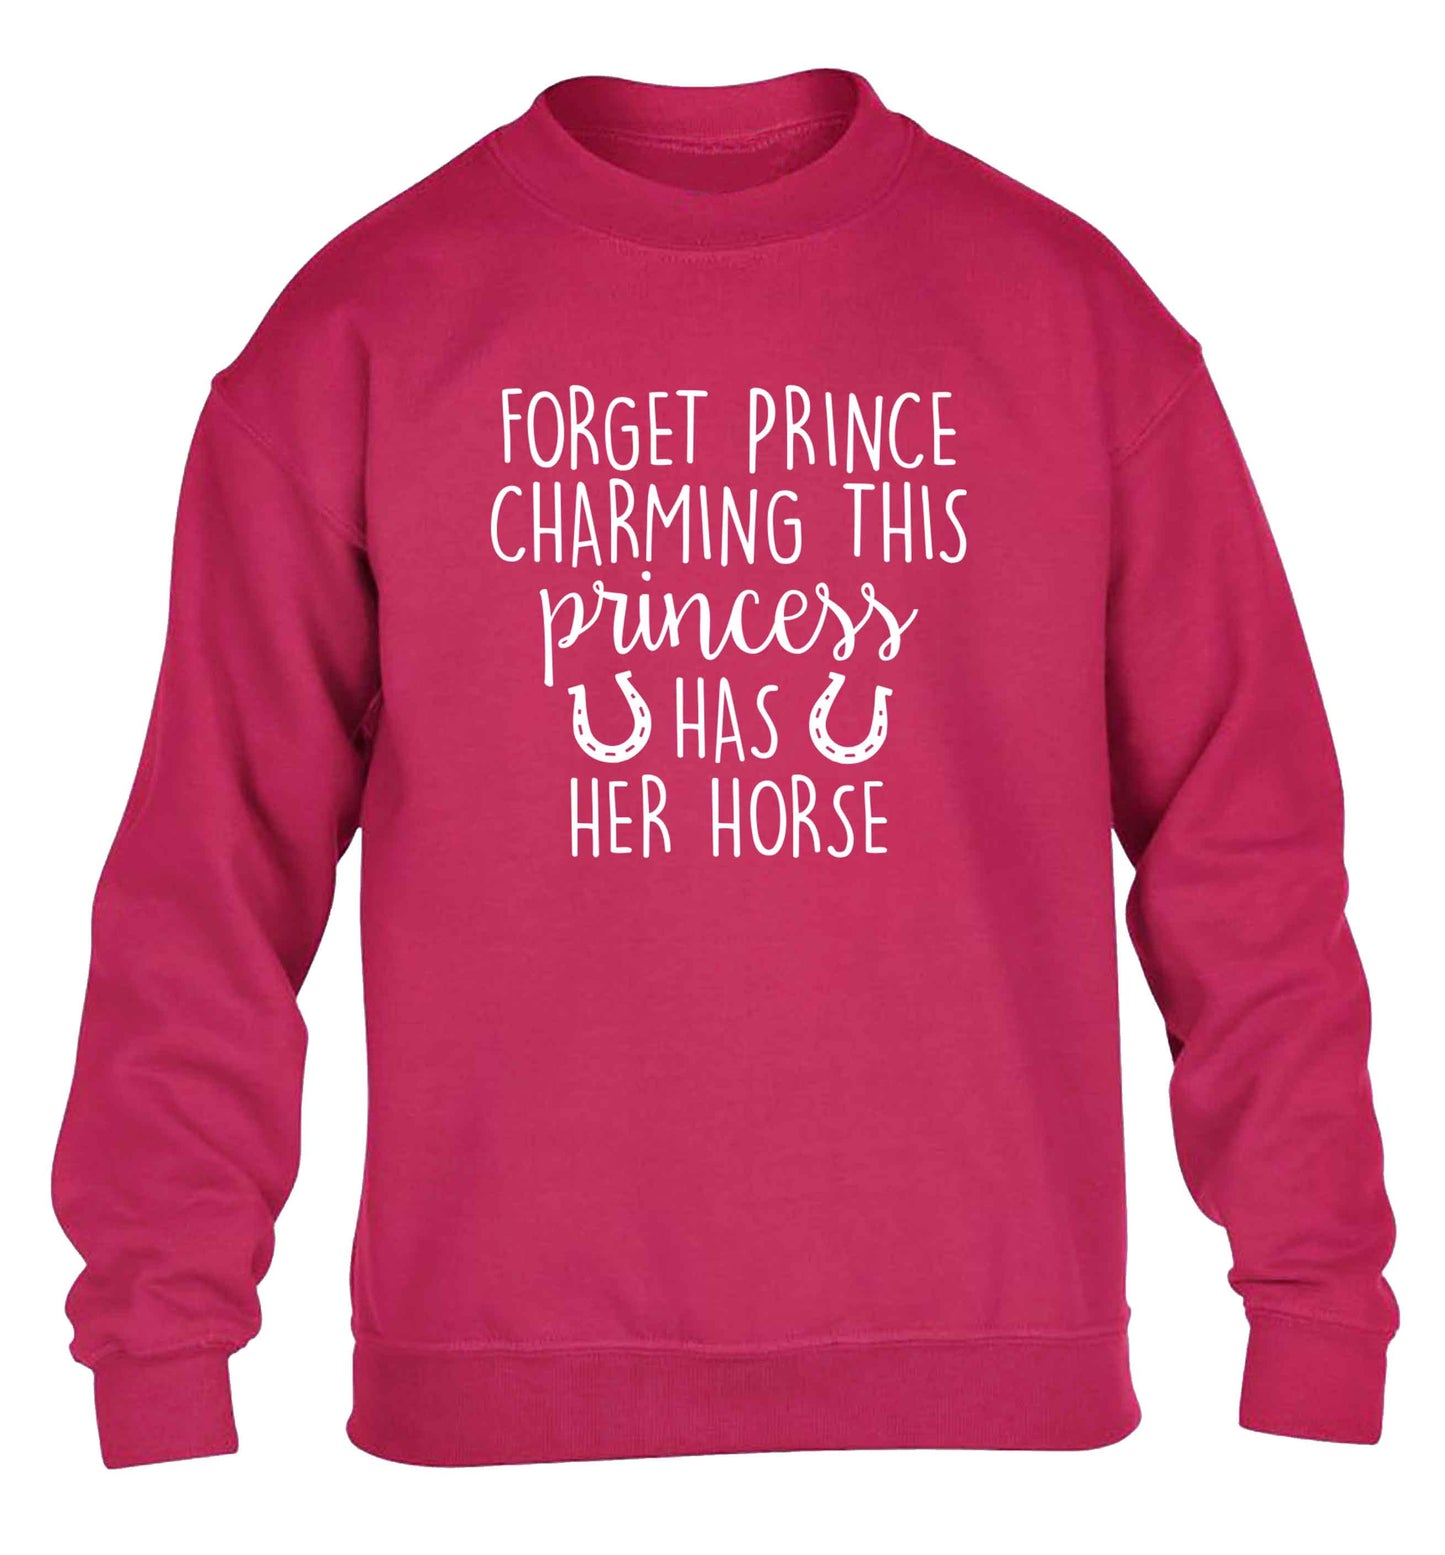 Forget prince charming this princess has her horse children's pink sweater 12-13 Years